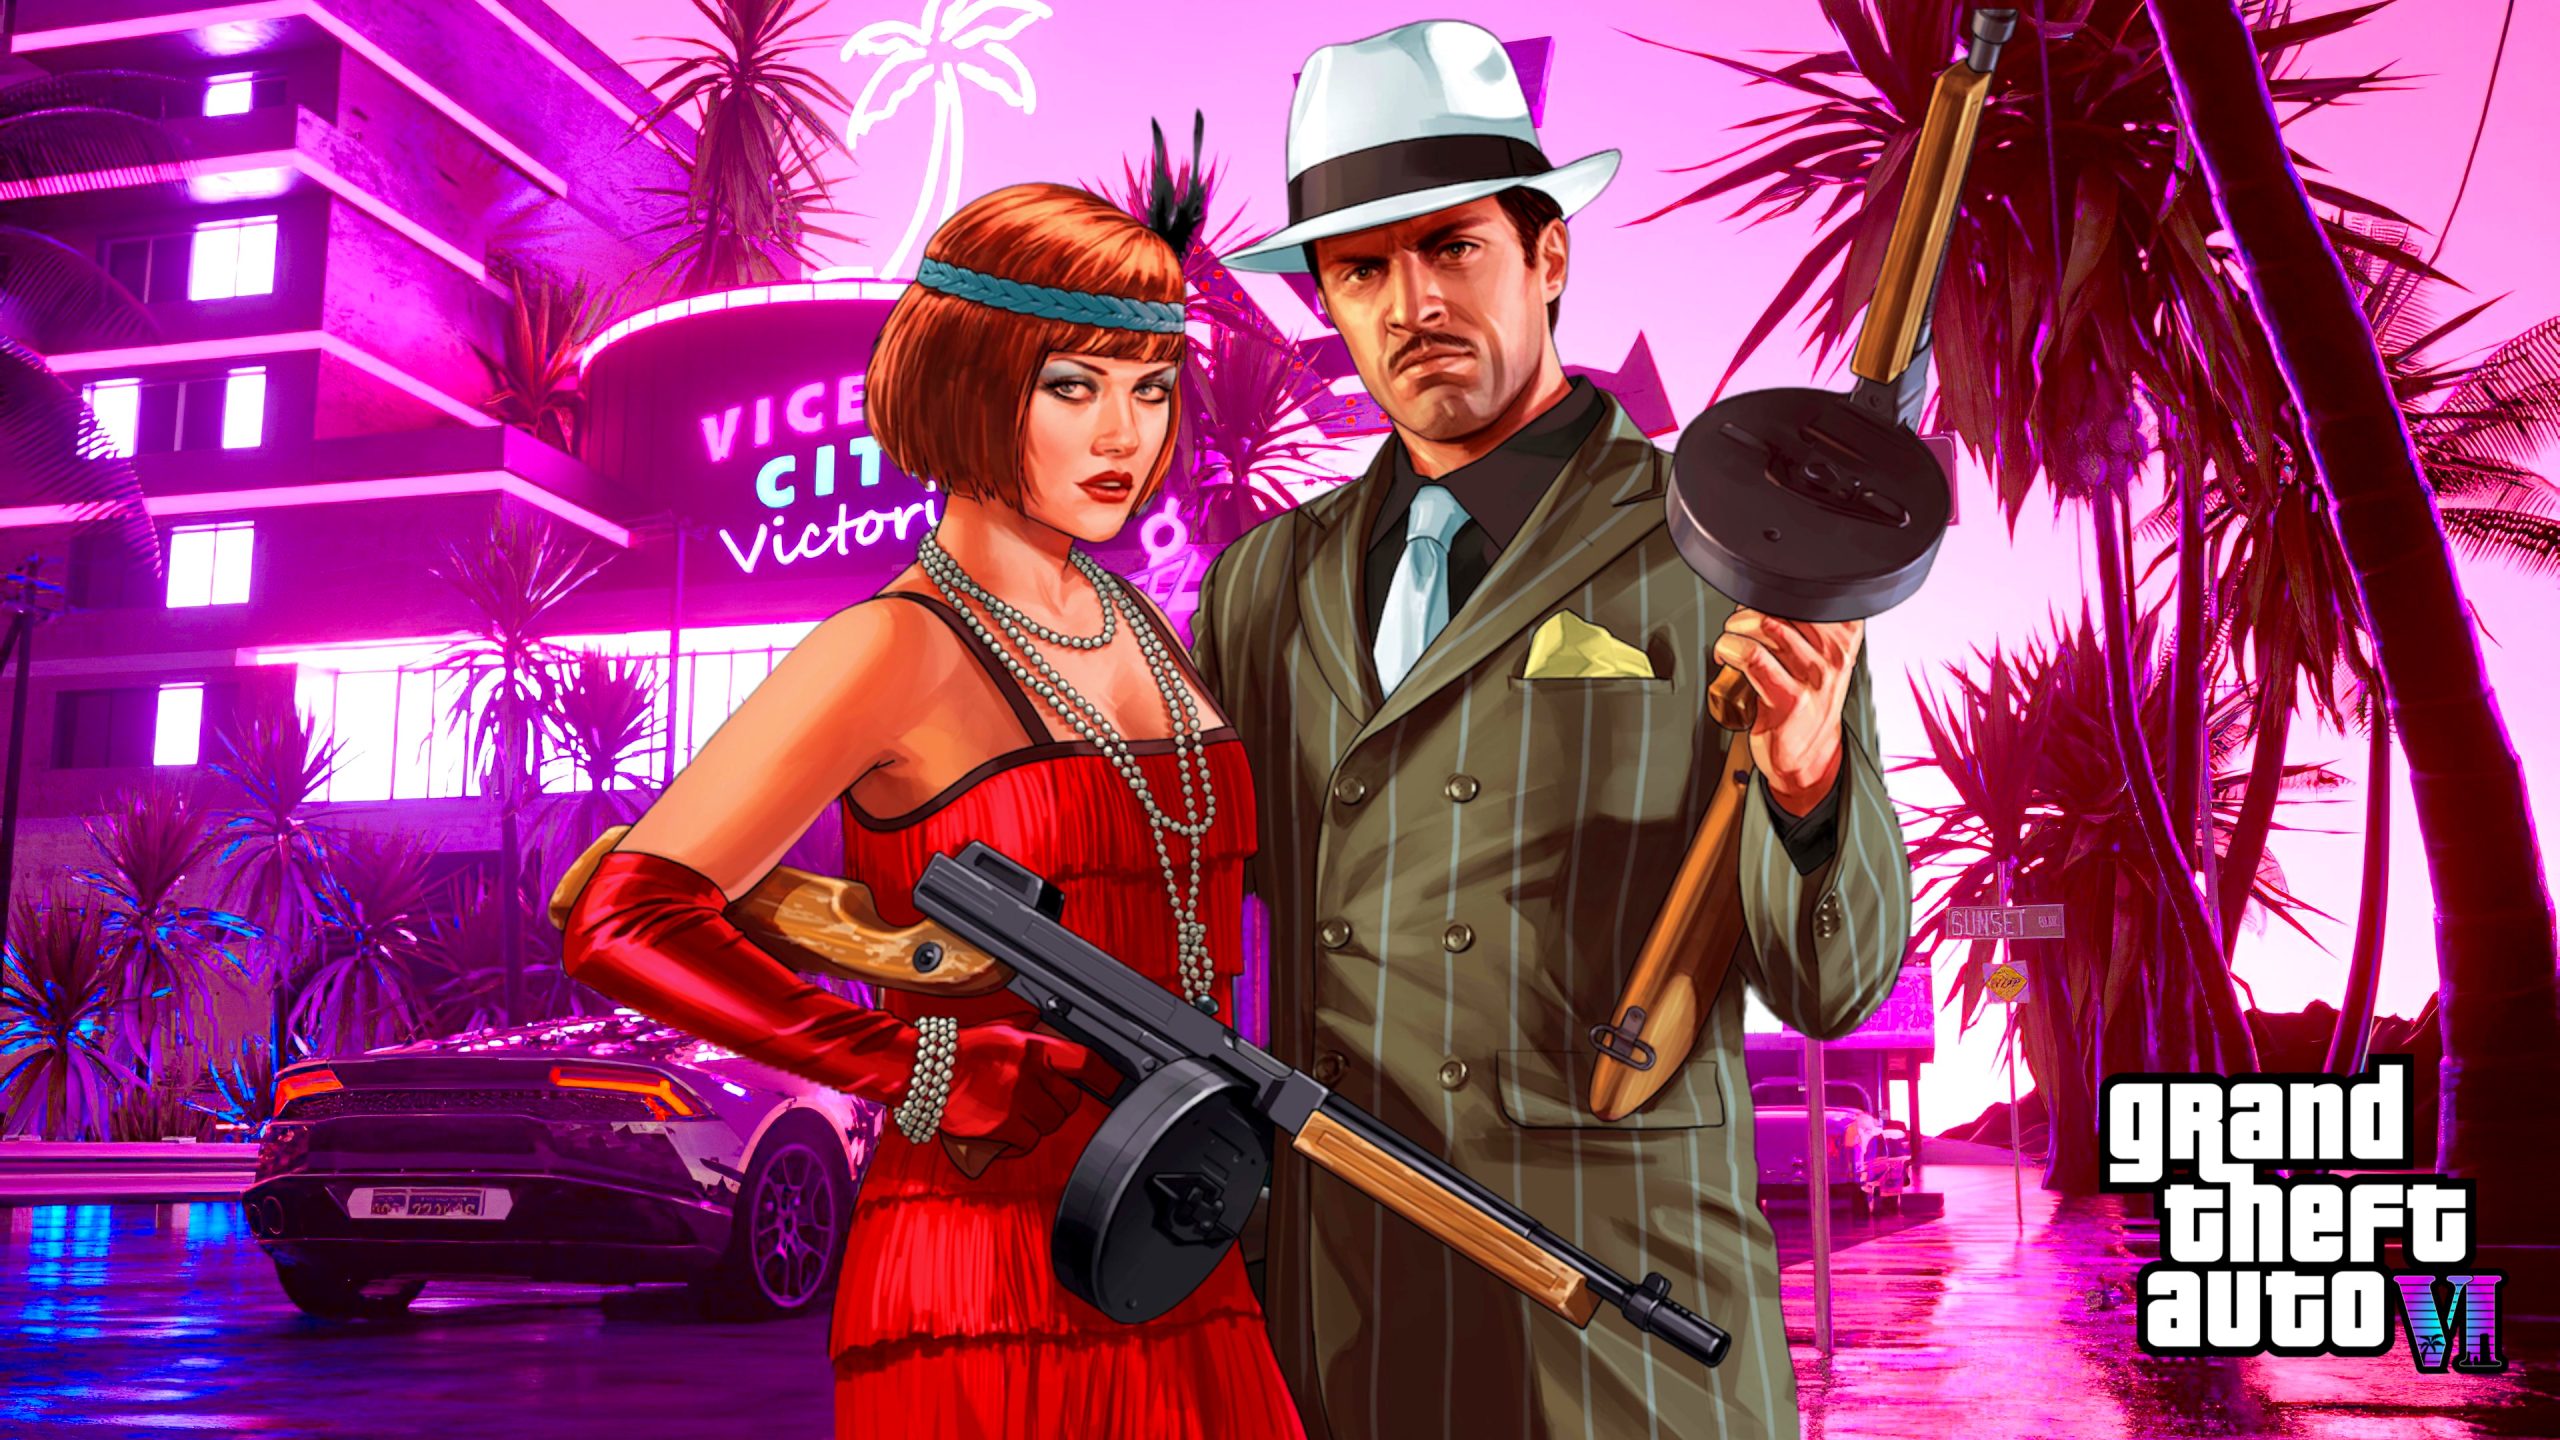 What the characters of GTA VI could look like.